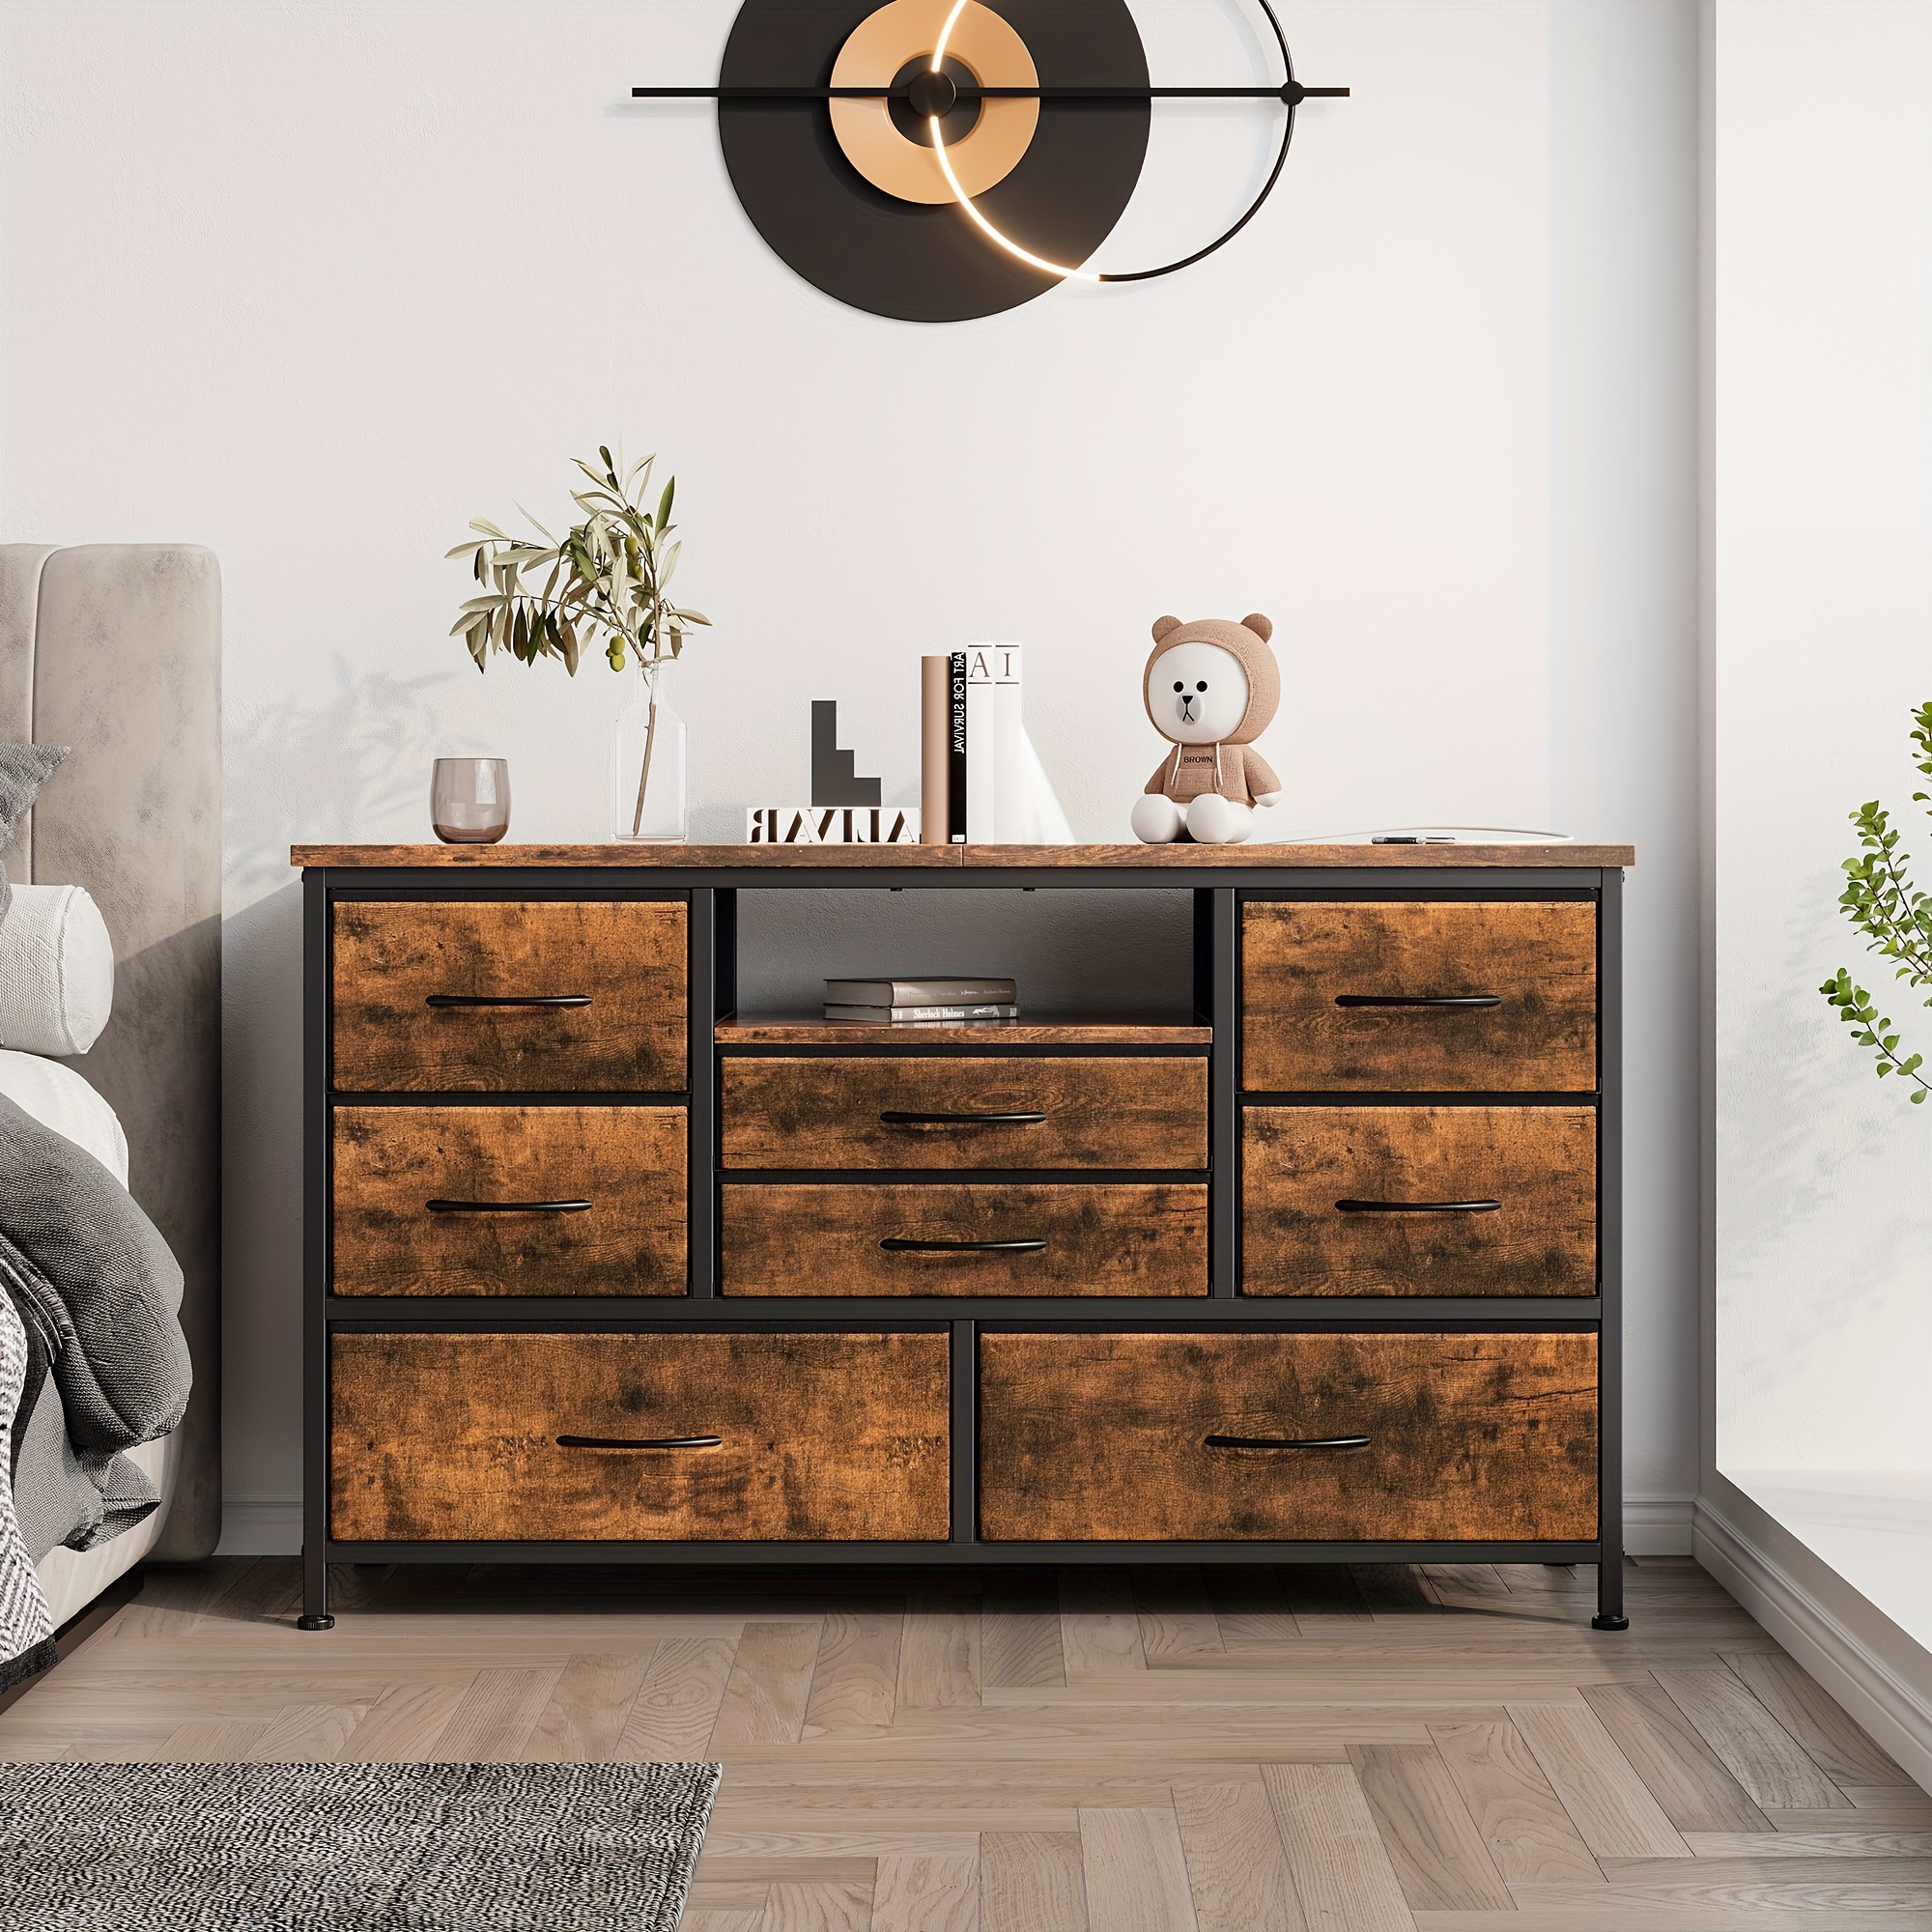 

Long Dresser With 8 Large Drawers For 55'' Stand, Long Dresser For Bedroom With 8 Deep Drawers For Storage In Closet, Living Room, Entryway